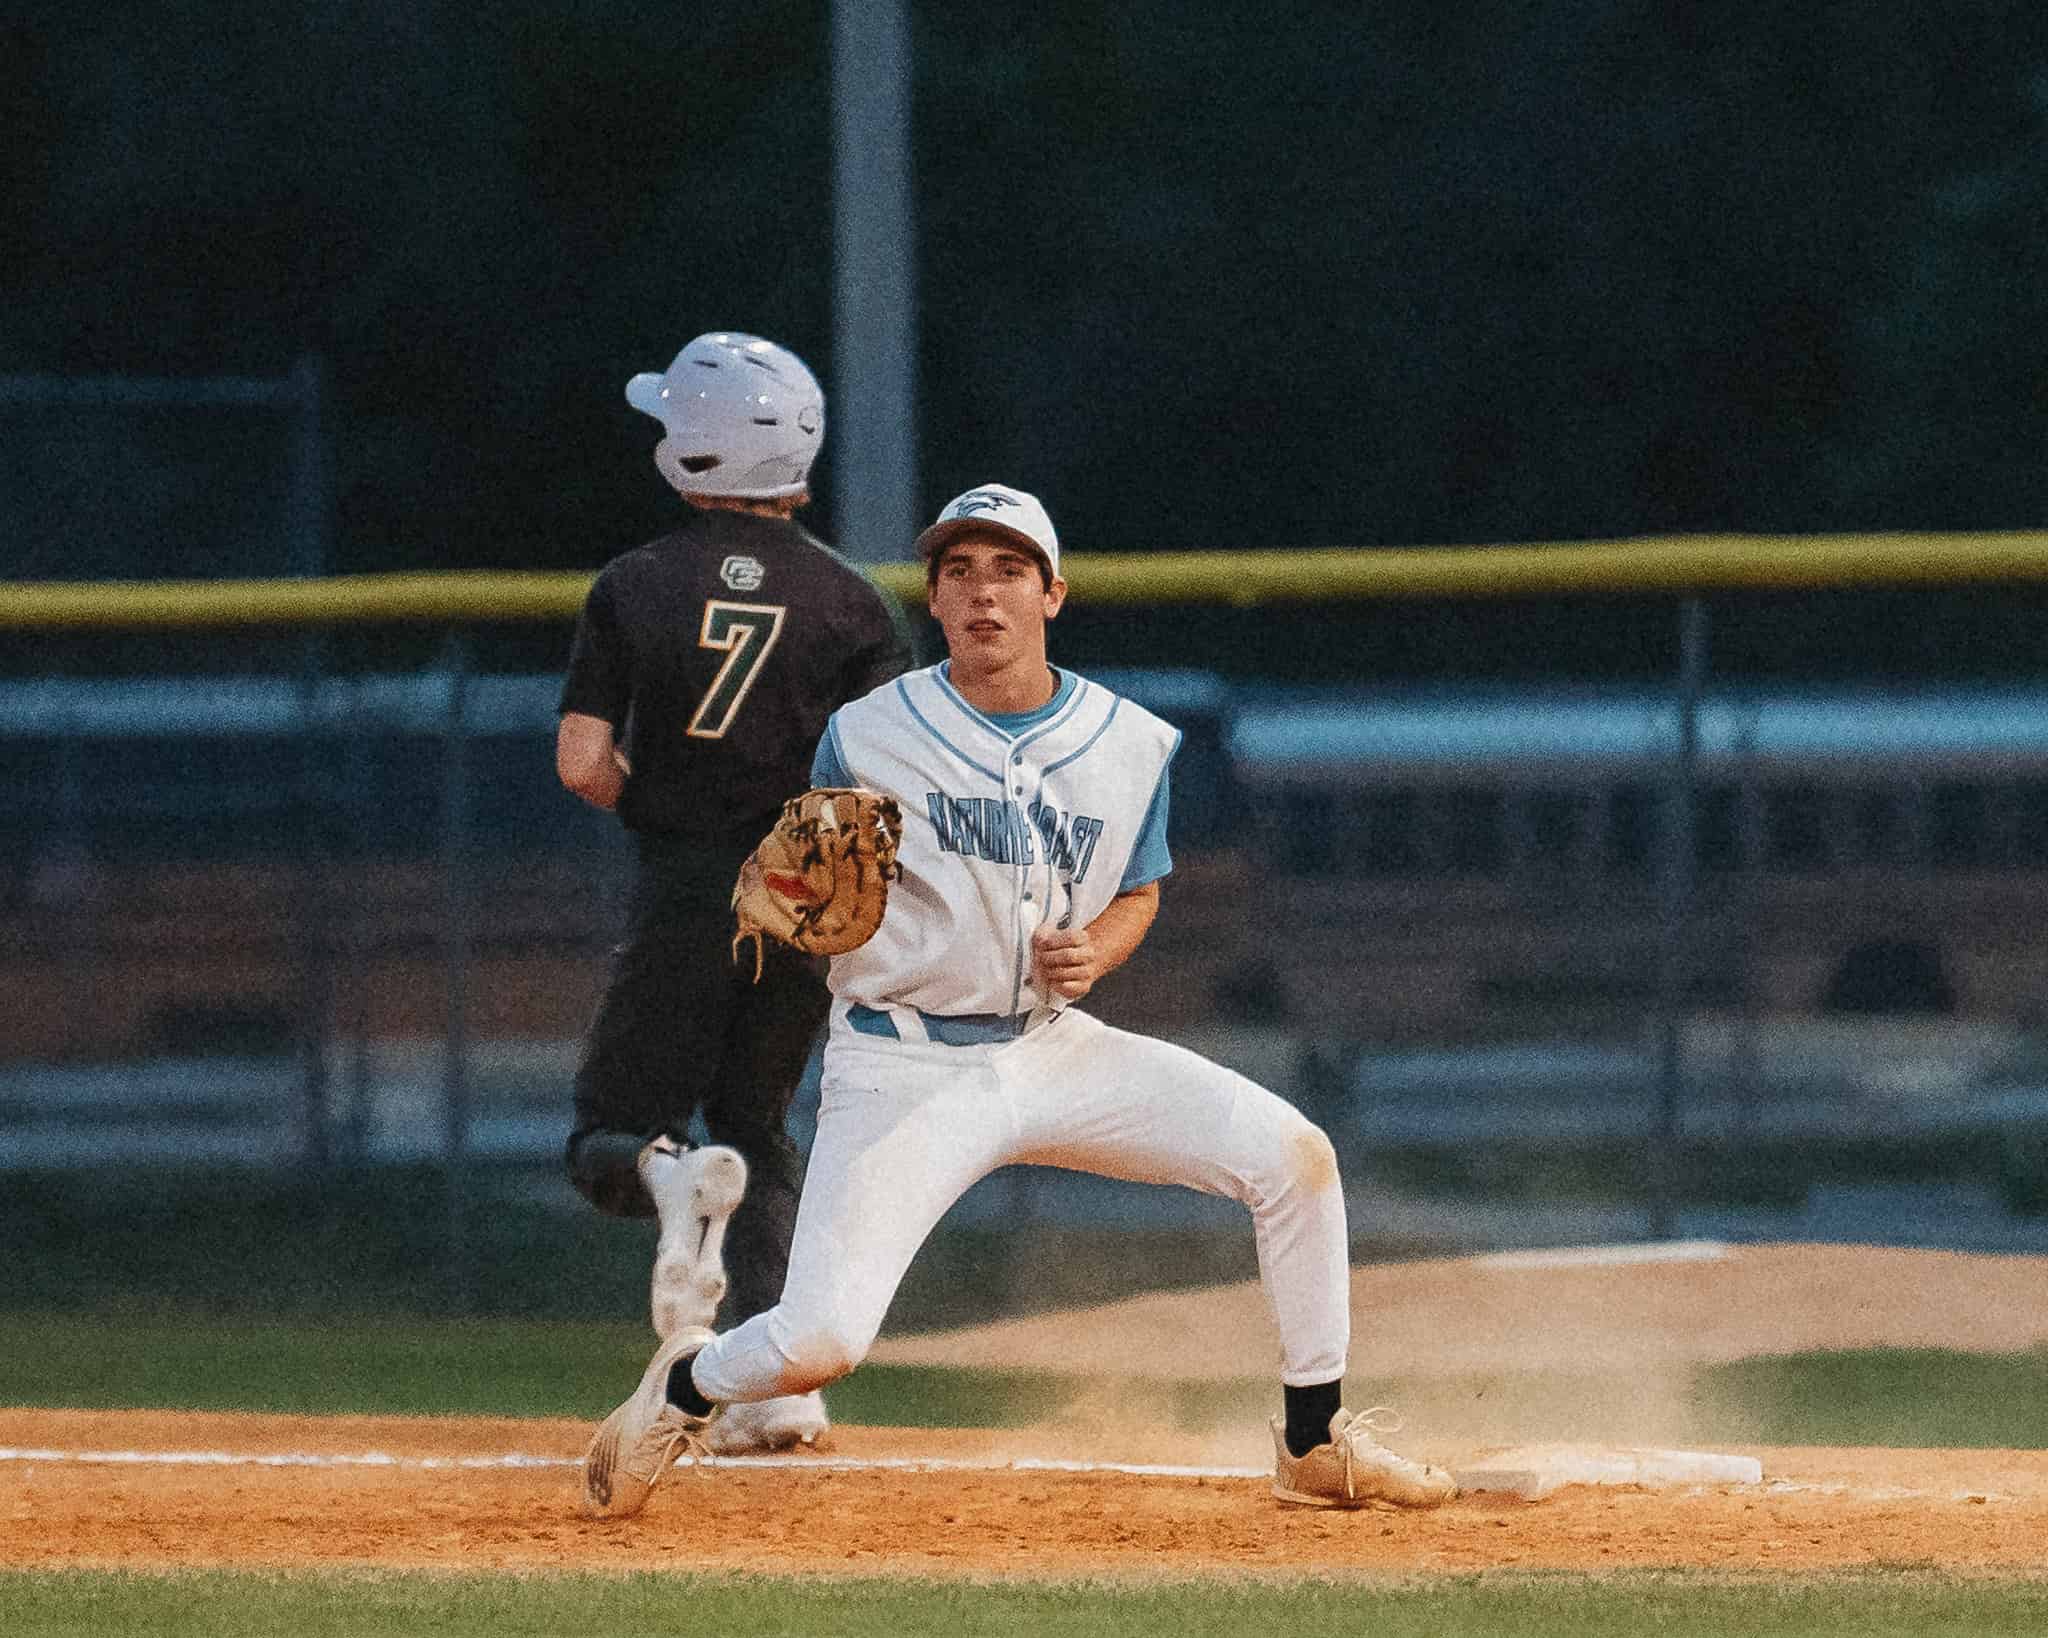 Joseph Rozsa of Nature Coast gets player out at first base. [Photo by Cynthia Leota]